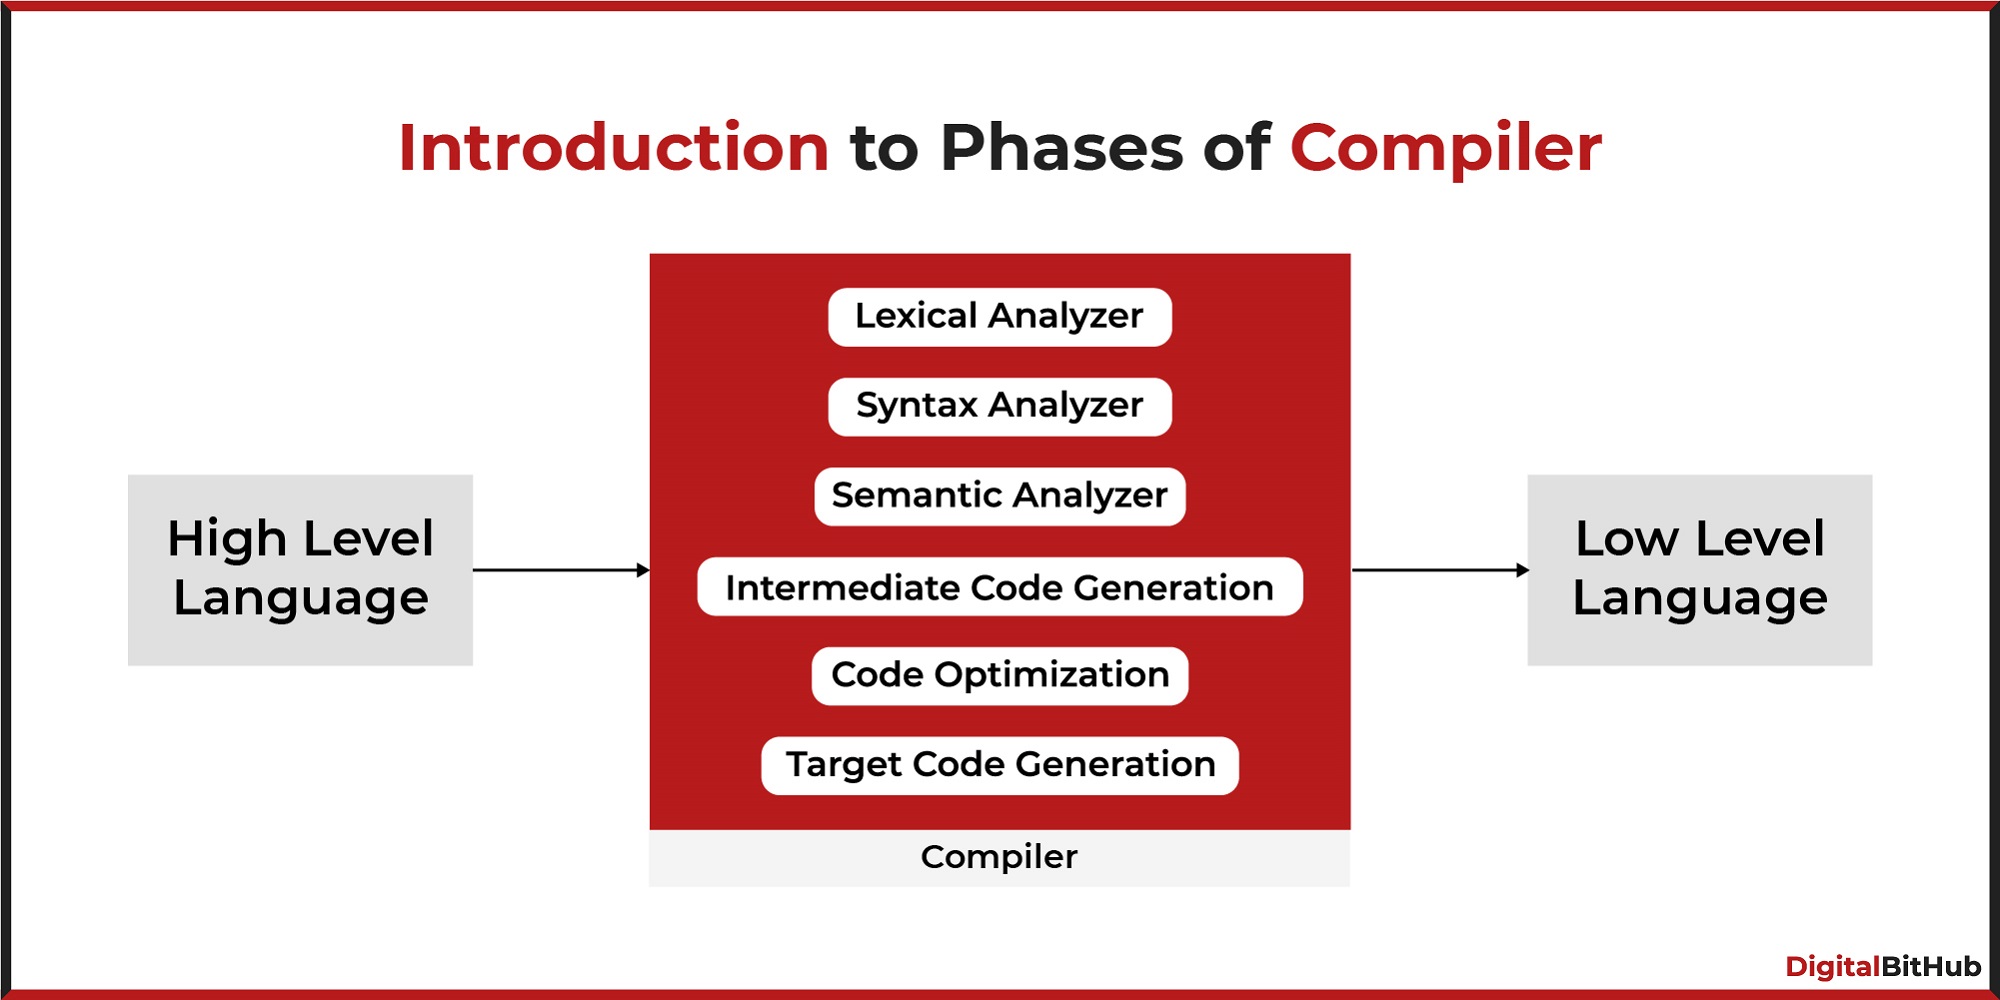 Introduction to Phases of Compiler